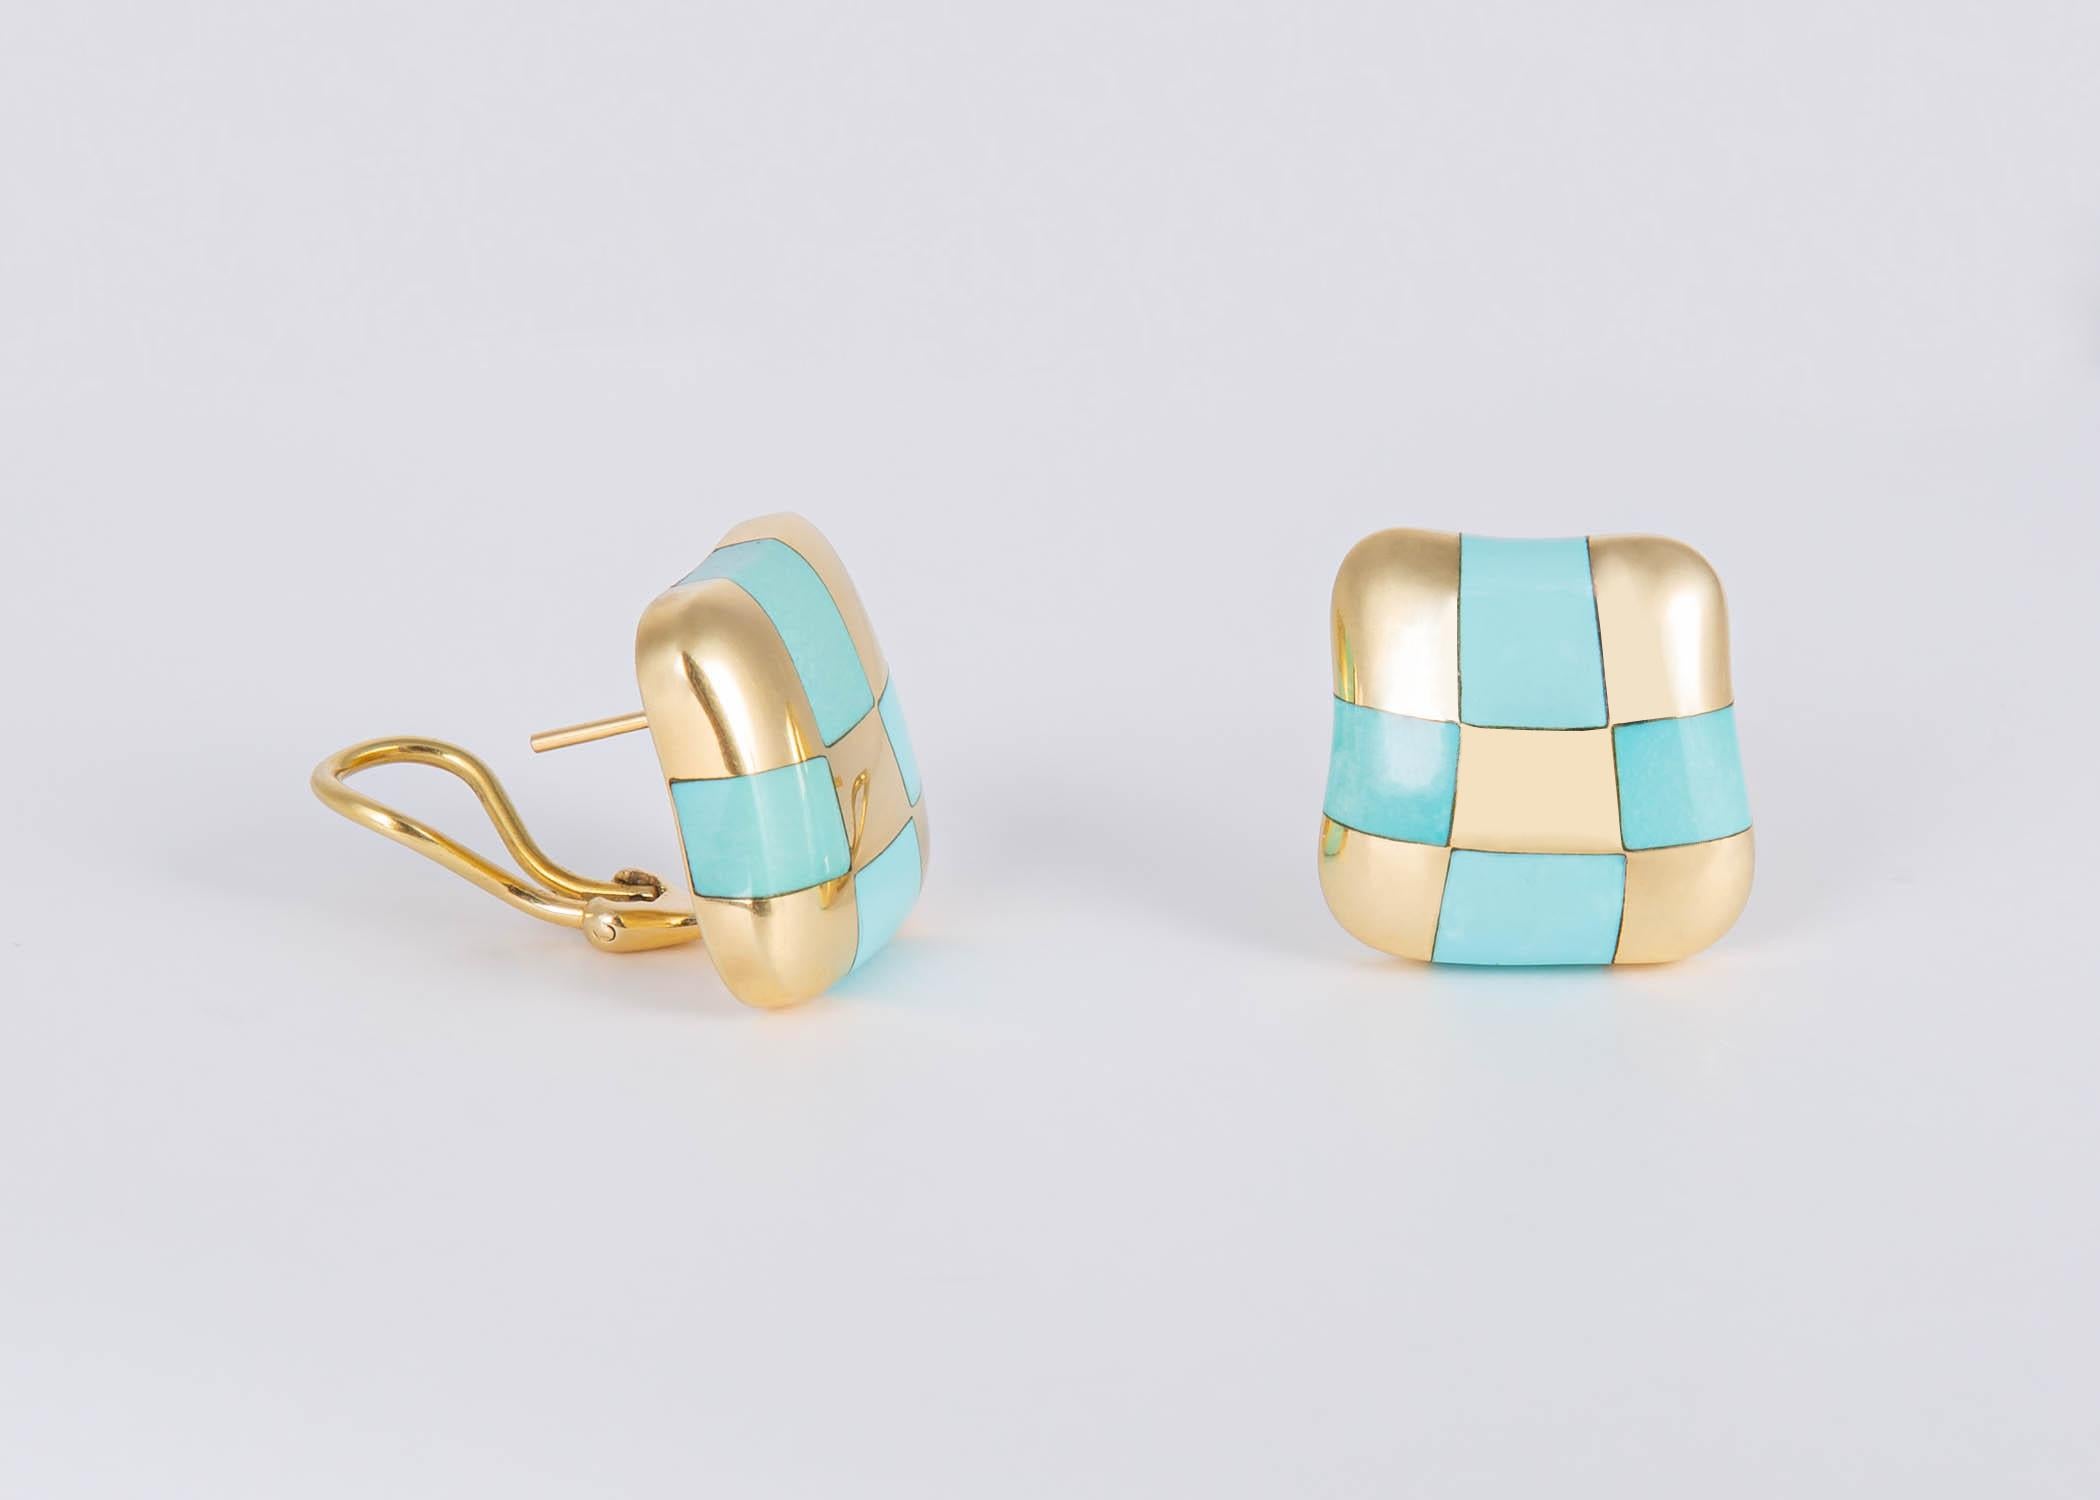 Square Cut Angela Cummings Turquoise and Gold Checker Board Earrings For Sale